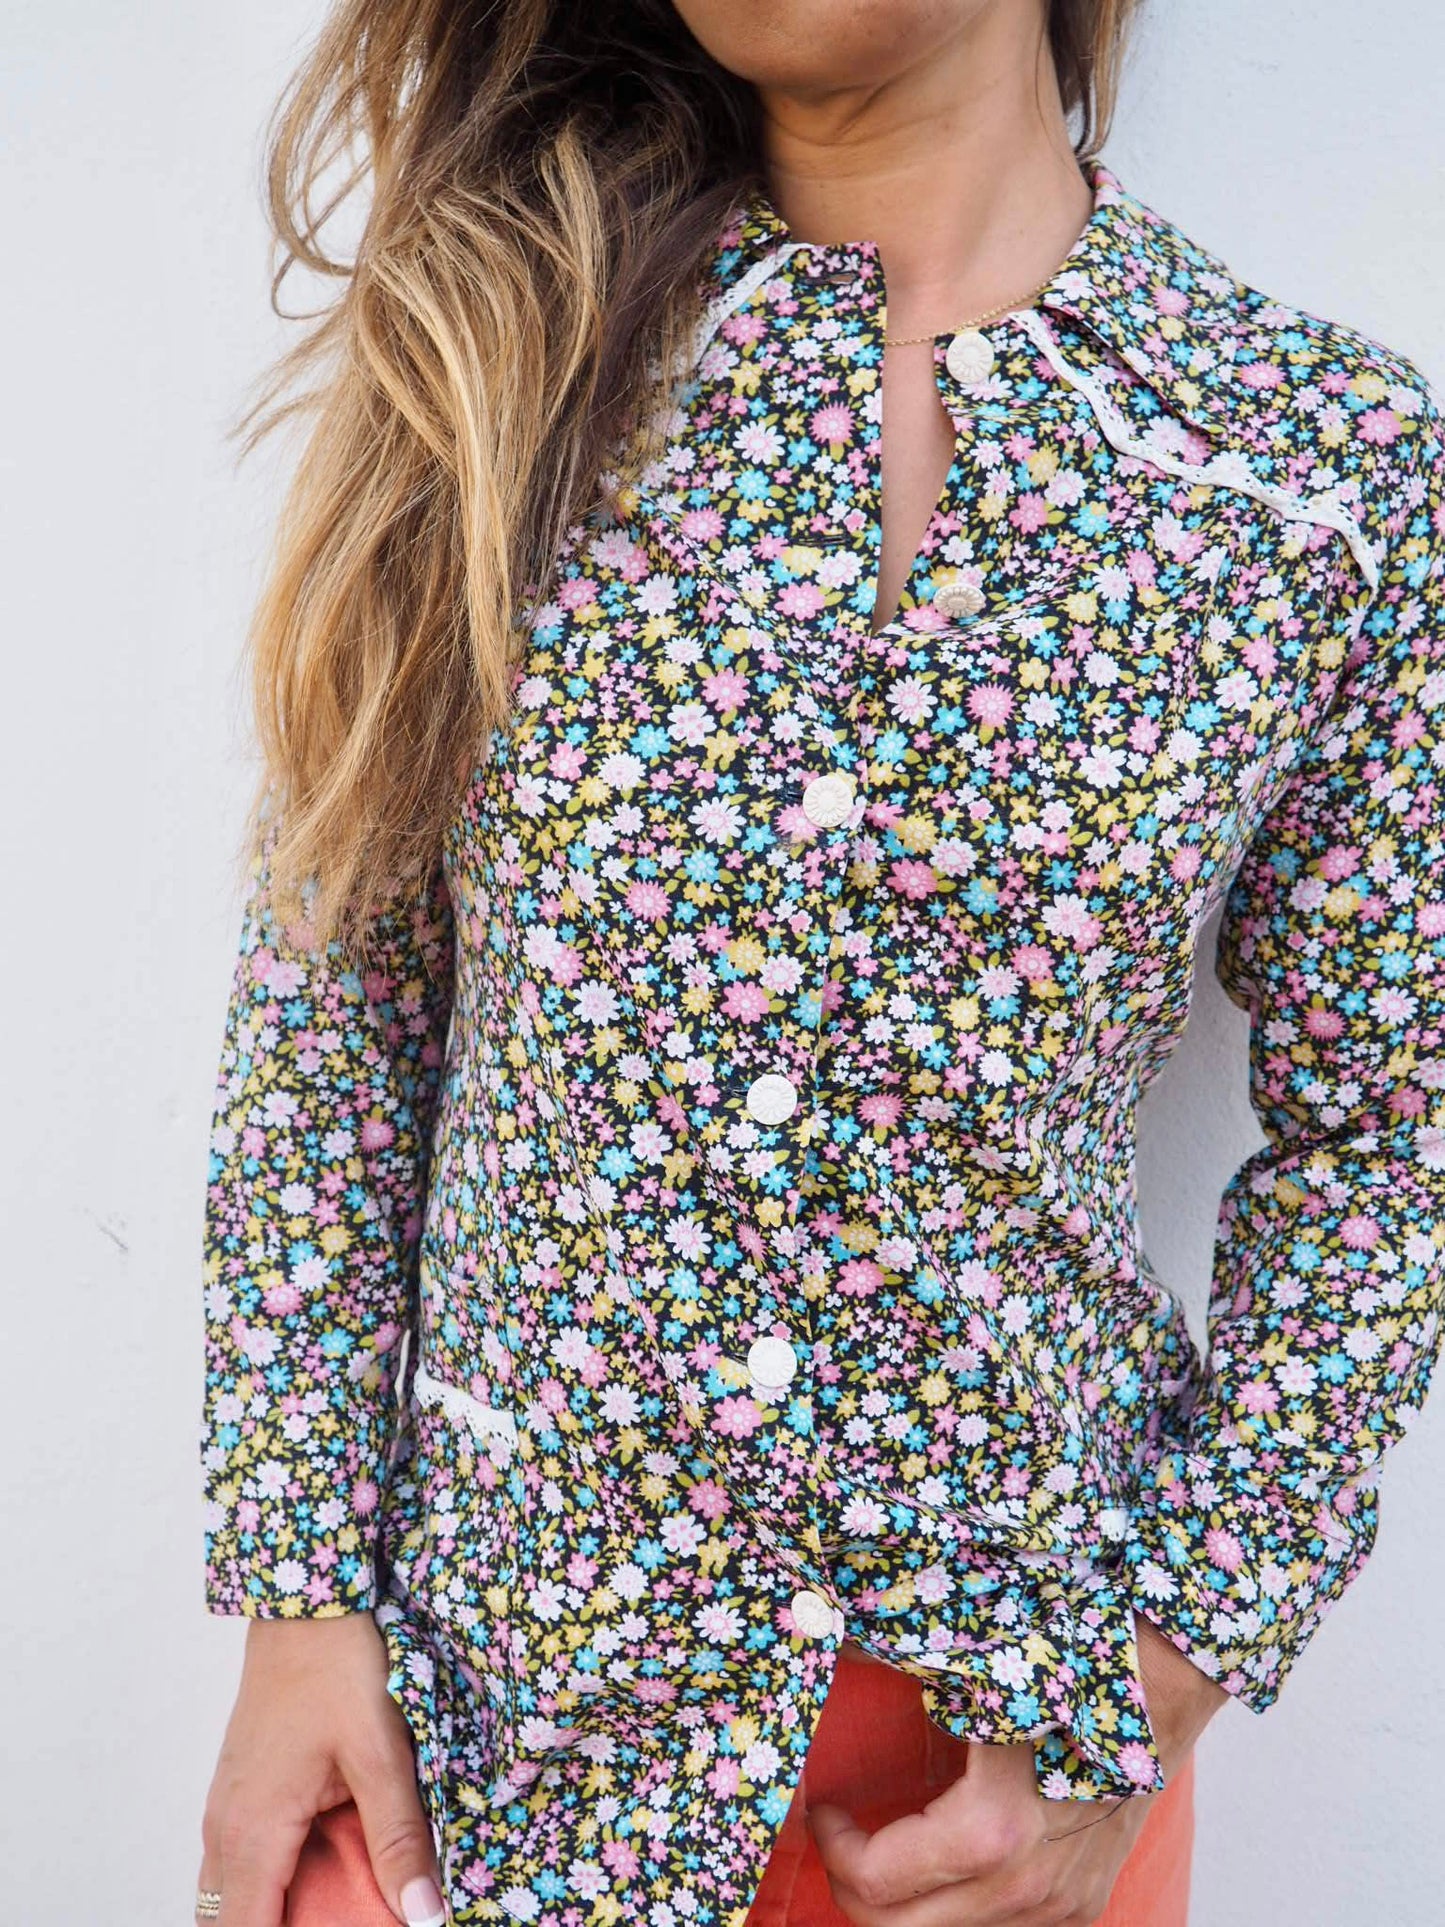 Vintage 1970’s pink and blue ditsy floral cotton long shirt with cool collars and pocket details